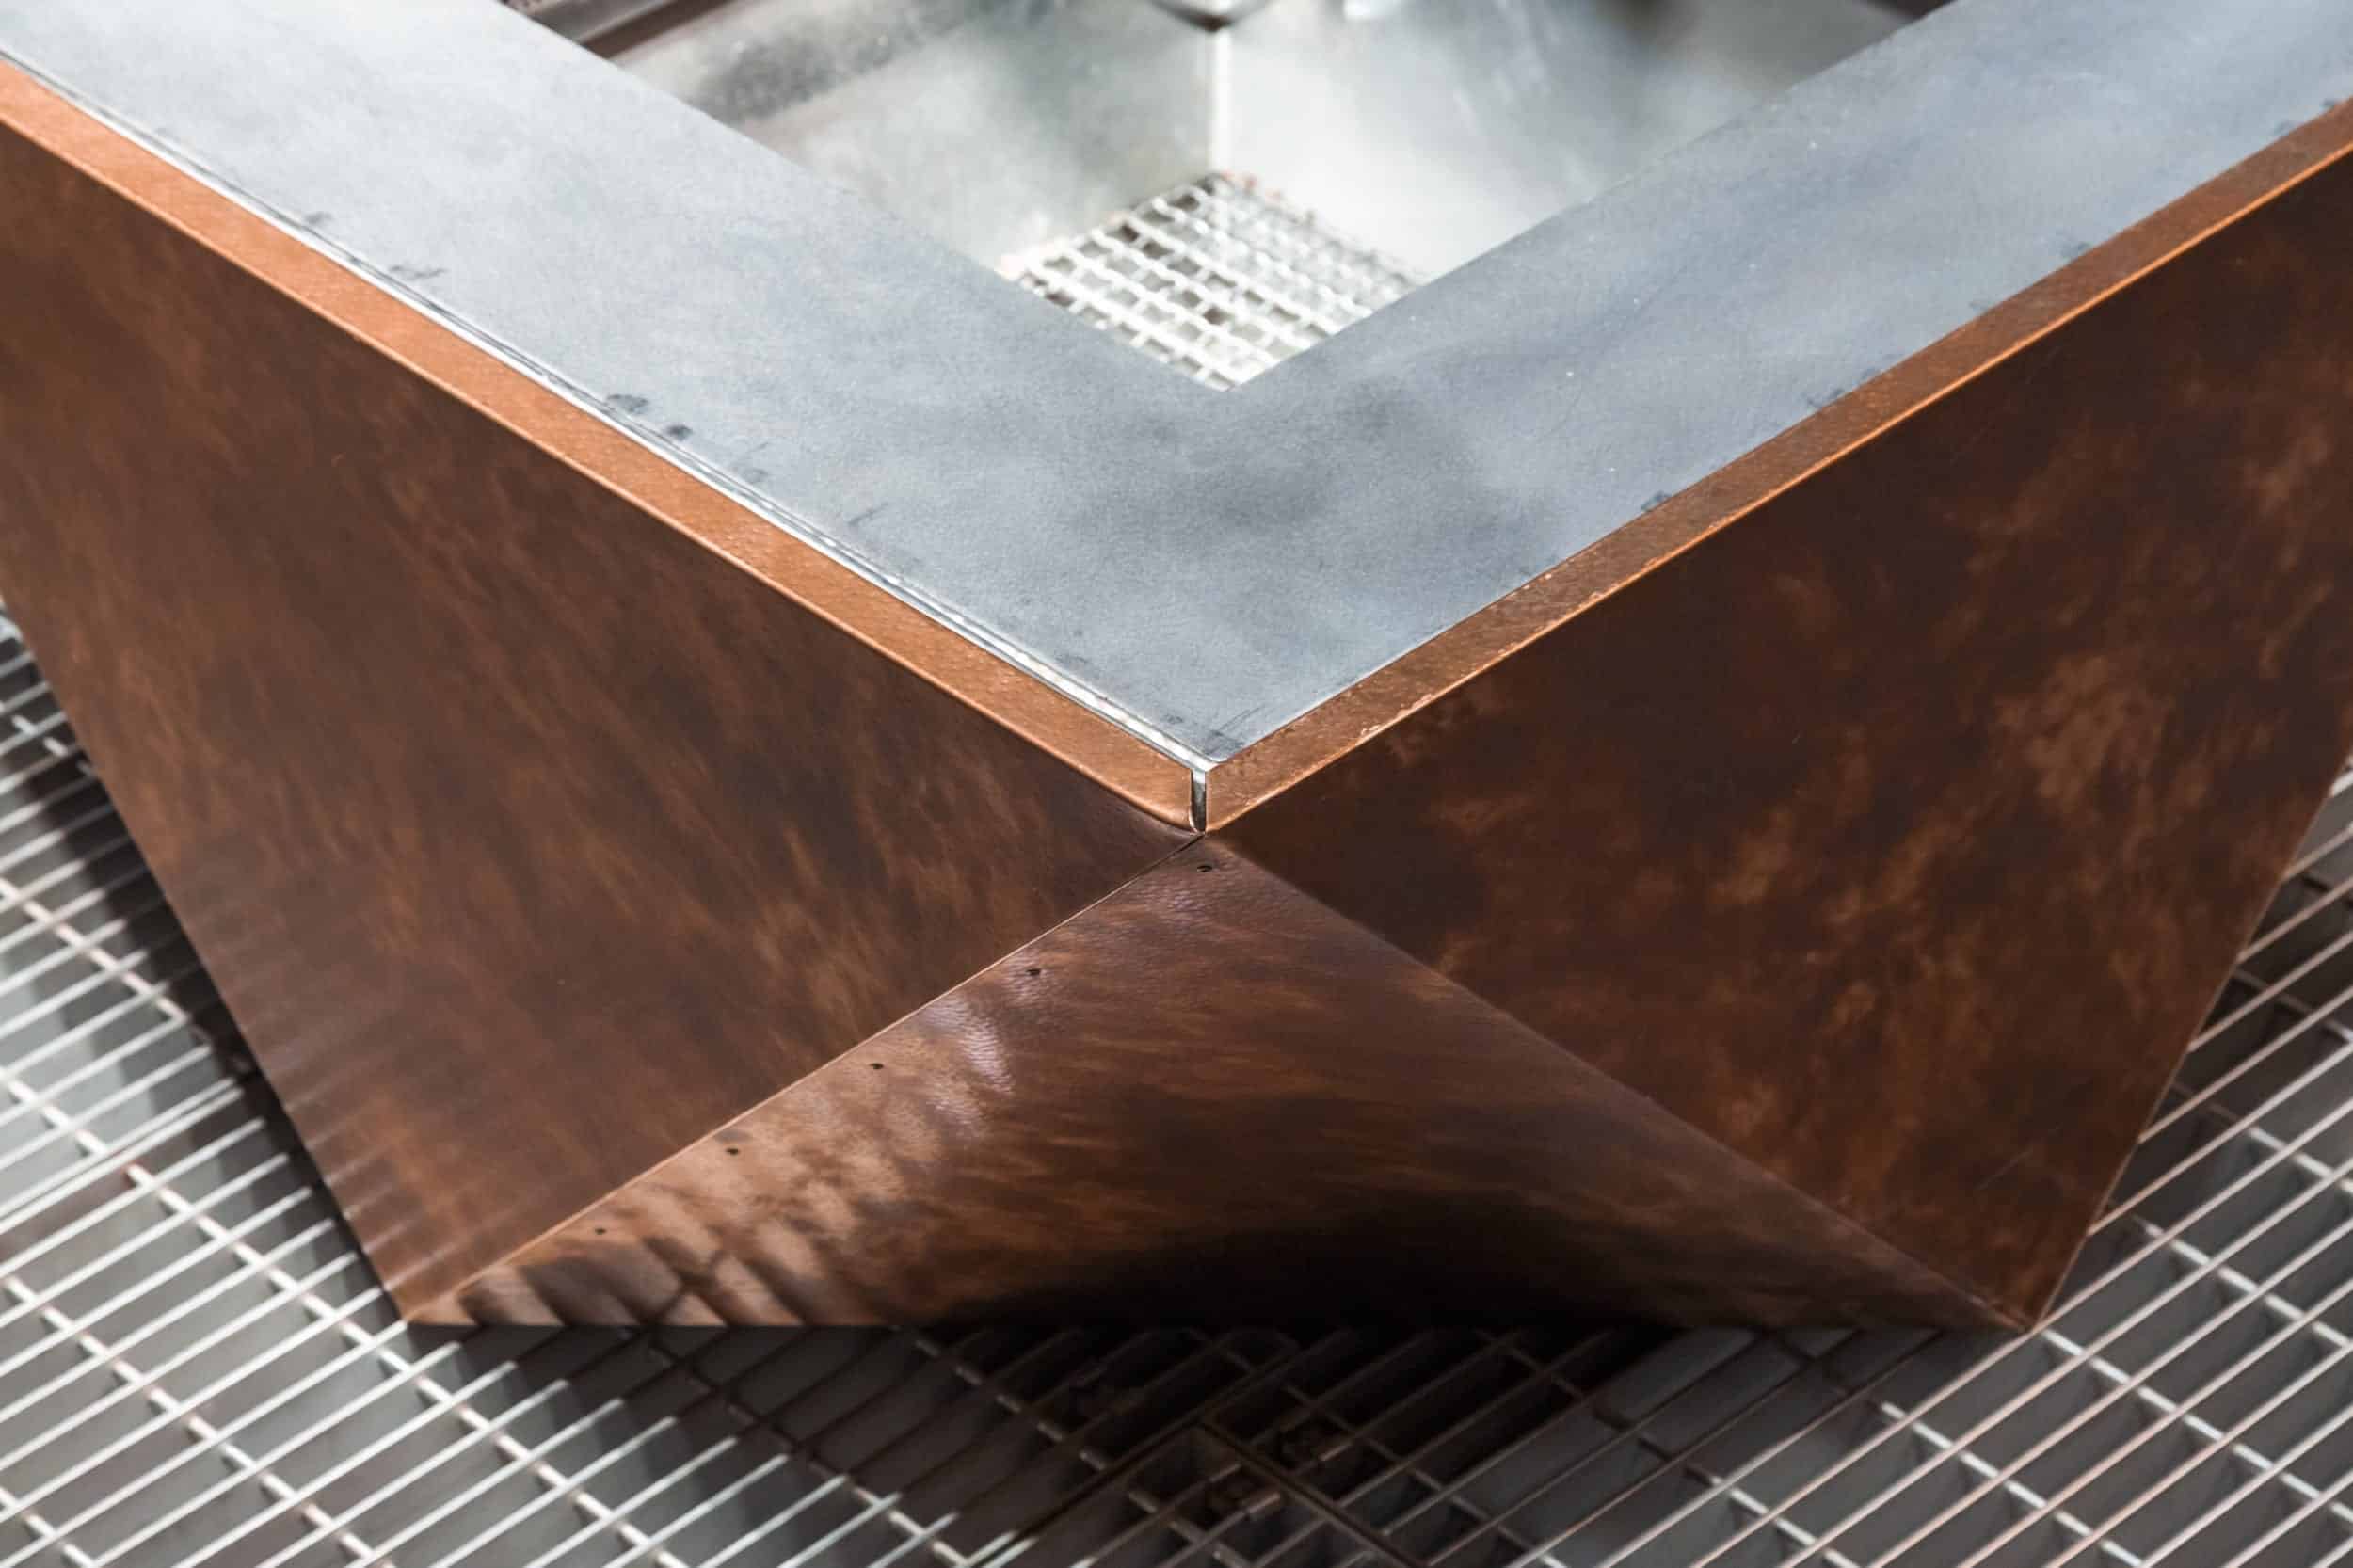 Starbucks Reserve New York Roastery featuring Zahner copper with custom patina.